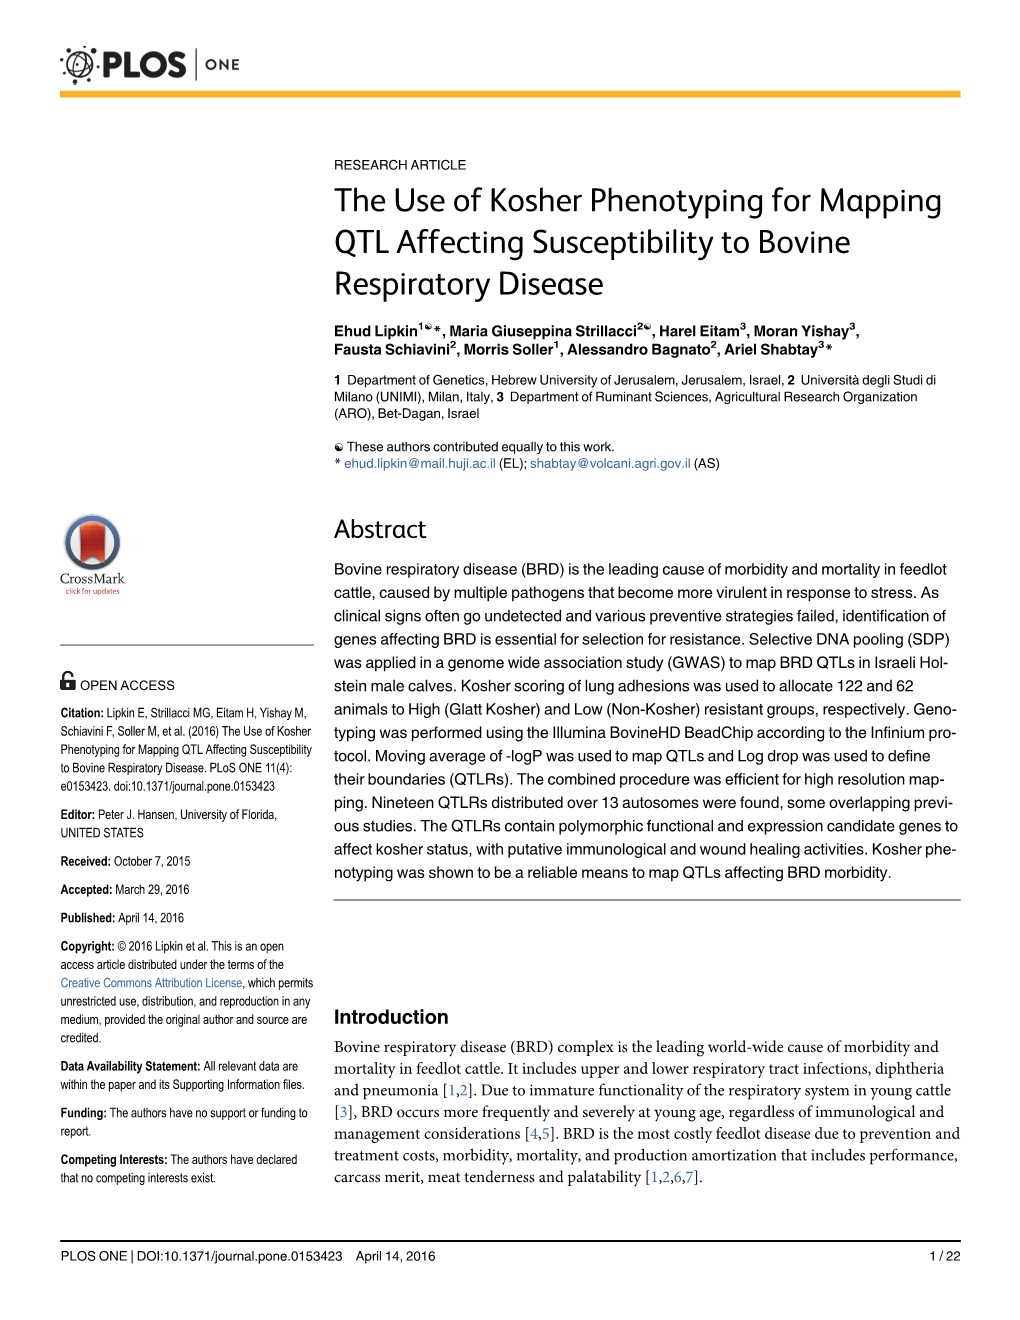 The Use of Kosher Phenotyping for Mapping QTL Affecting Susceptibility to Bovine Respiratory Disease